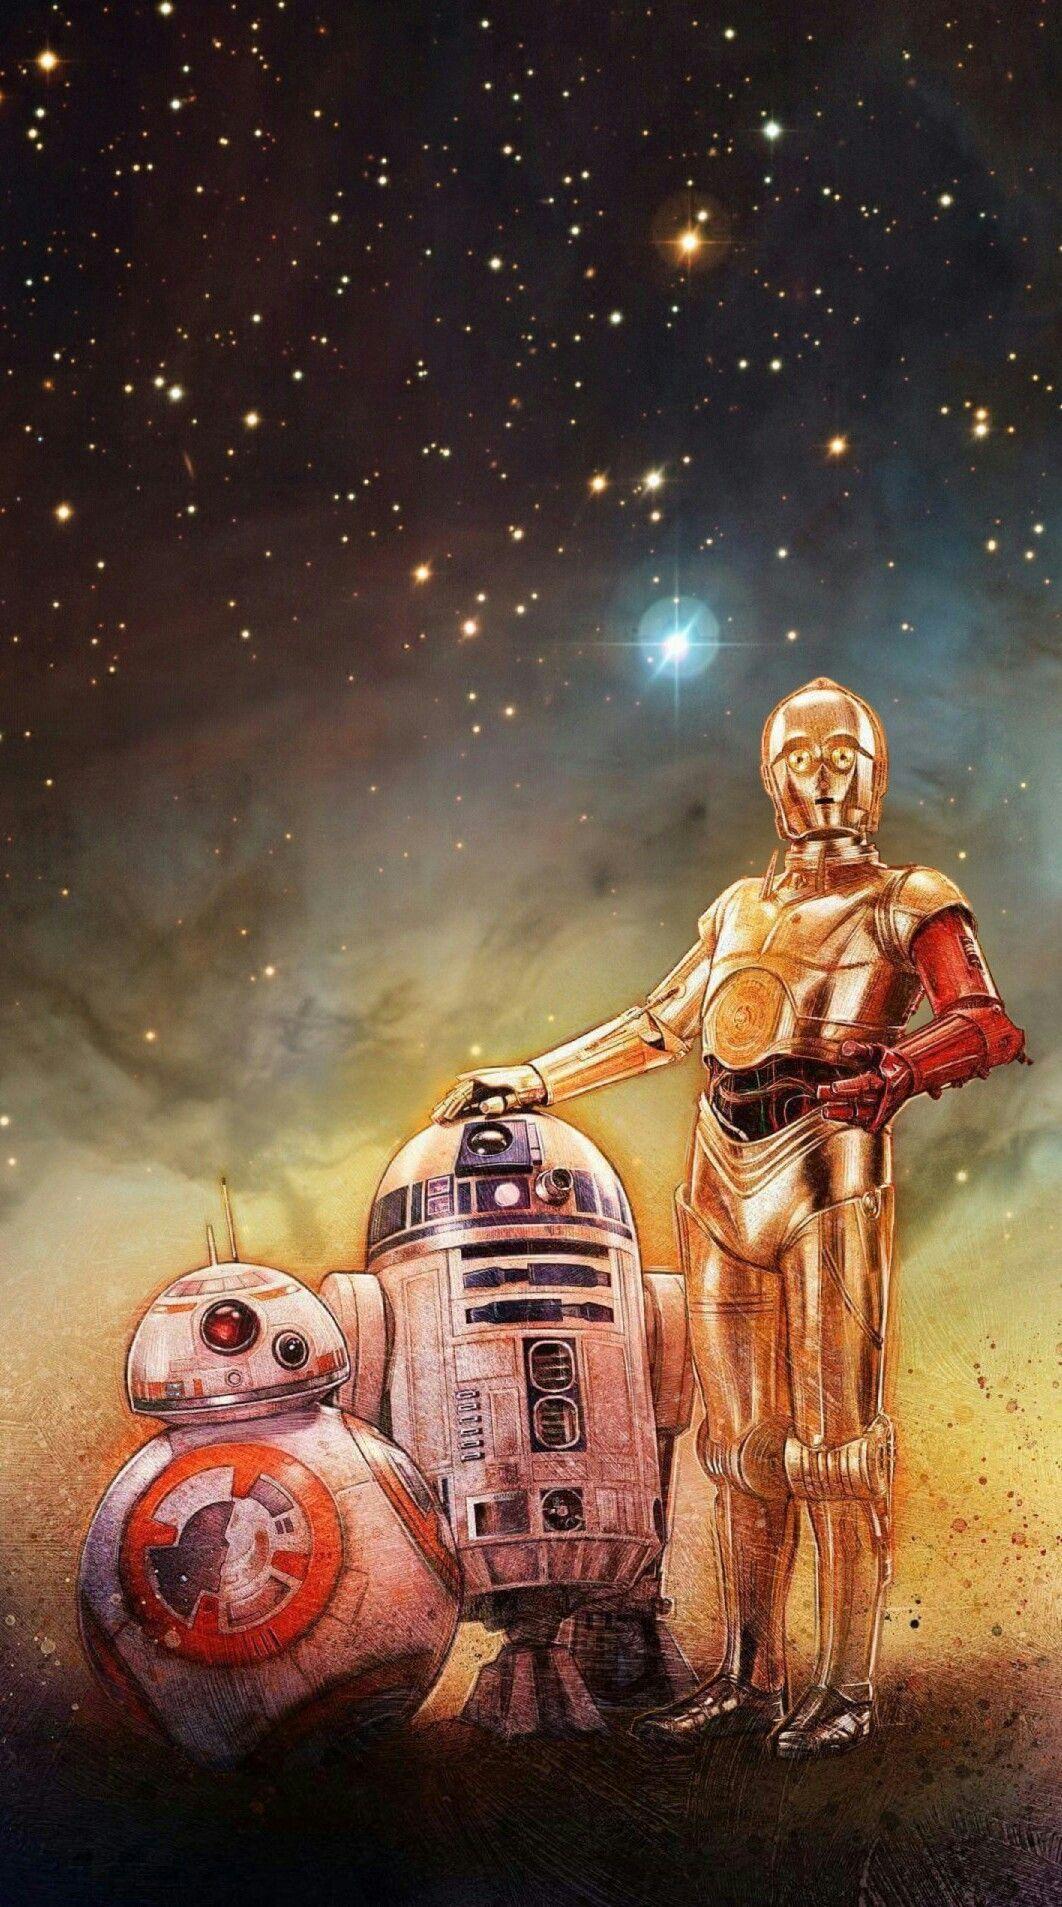 Star Wars Droid Wallpapers Top Free Star Wars Droid Backgrounds Wallpaperaccess